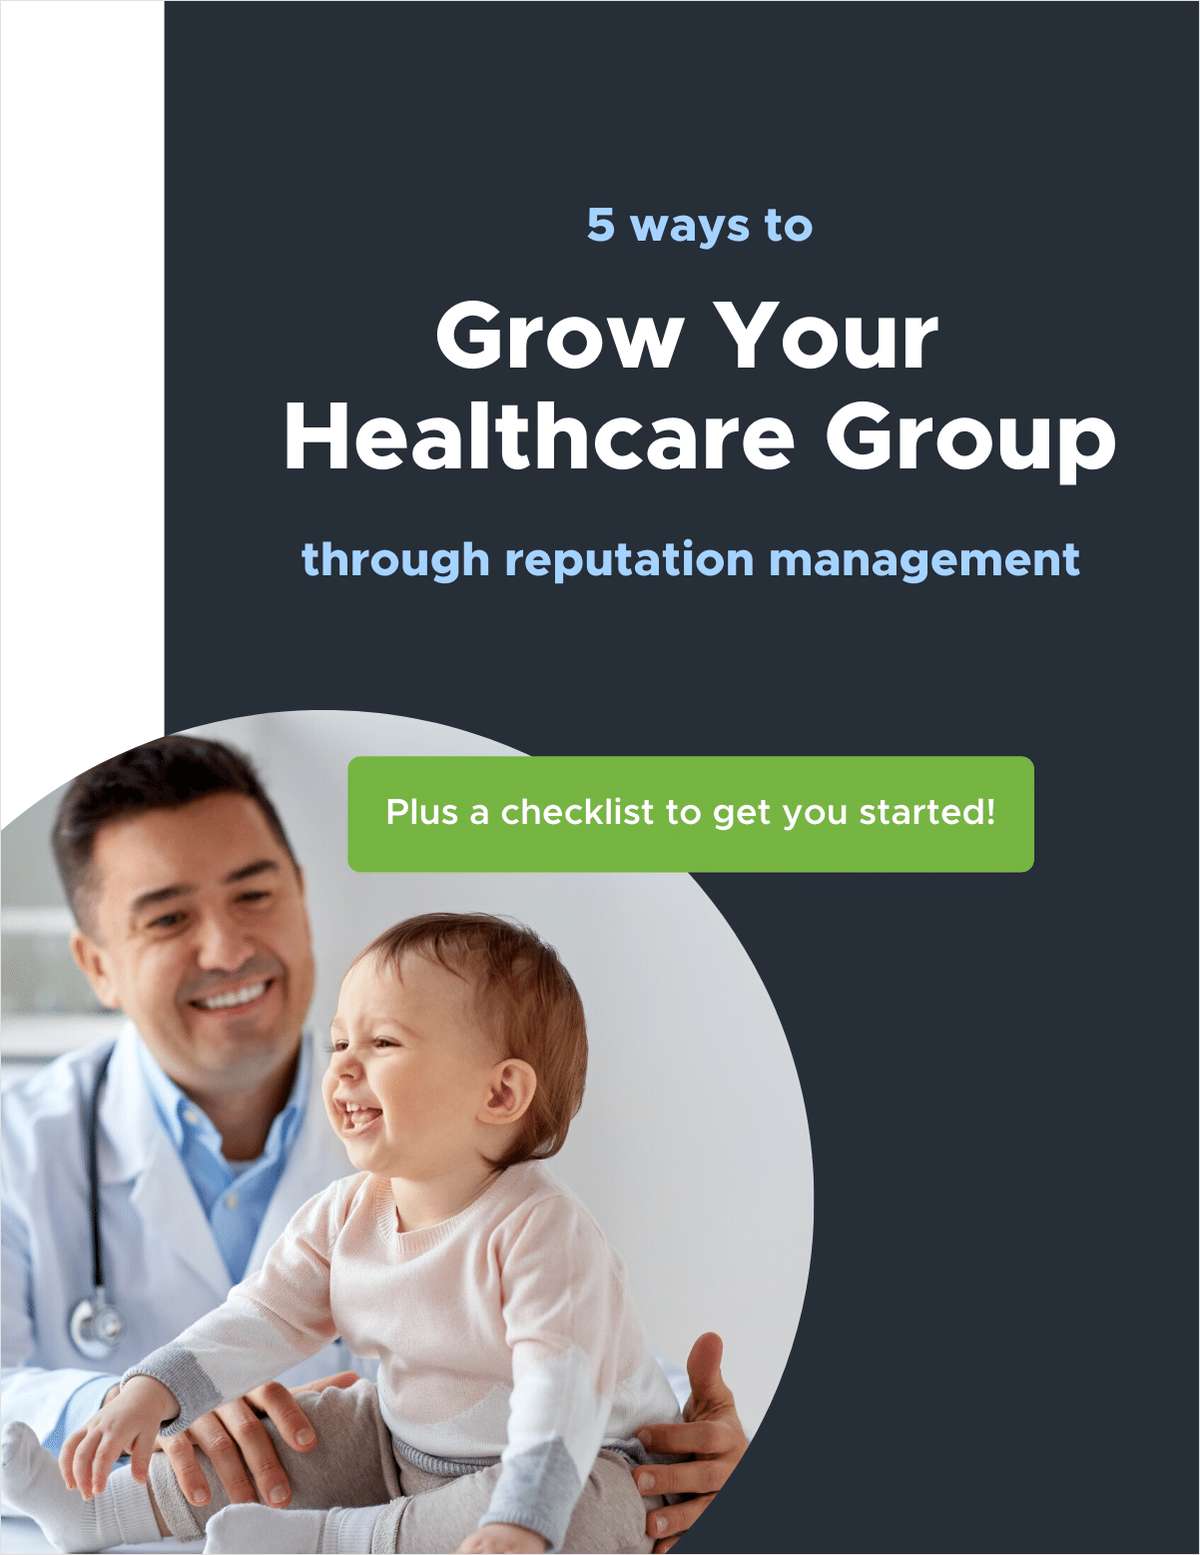 5 Ways to Grow Your Healthcare Group Through Reputation Management